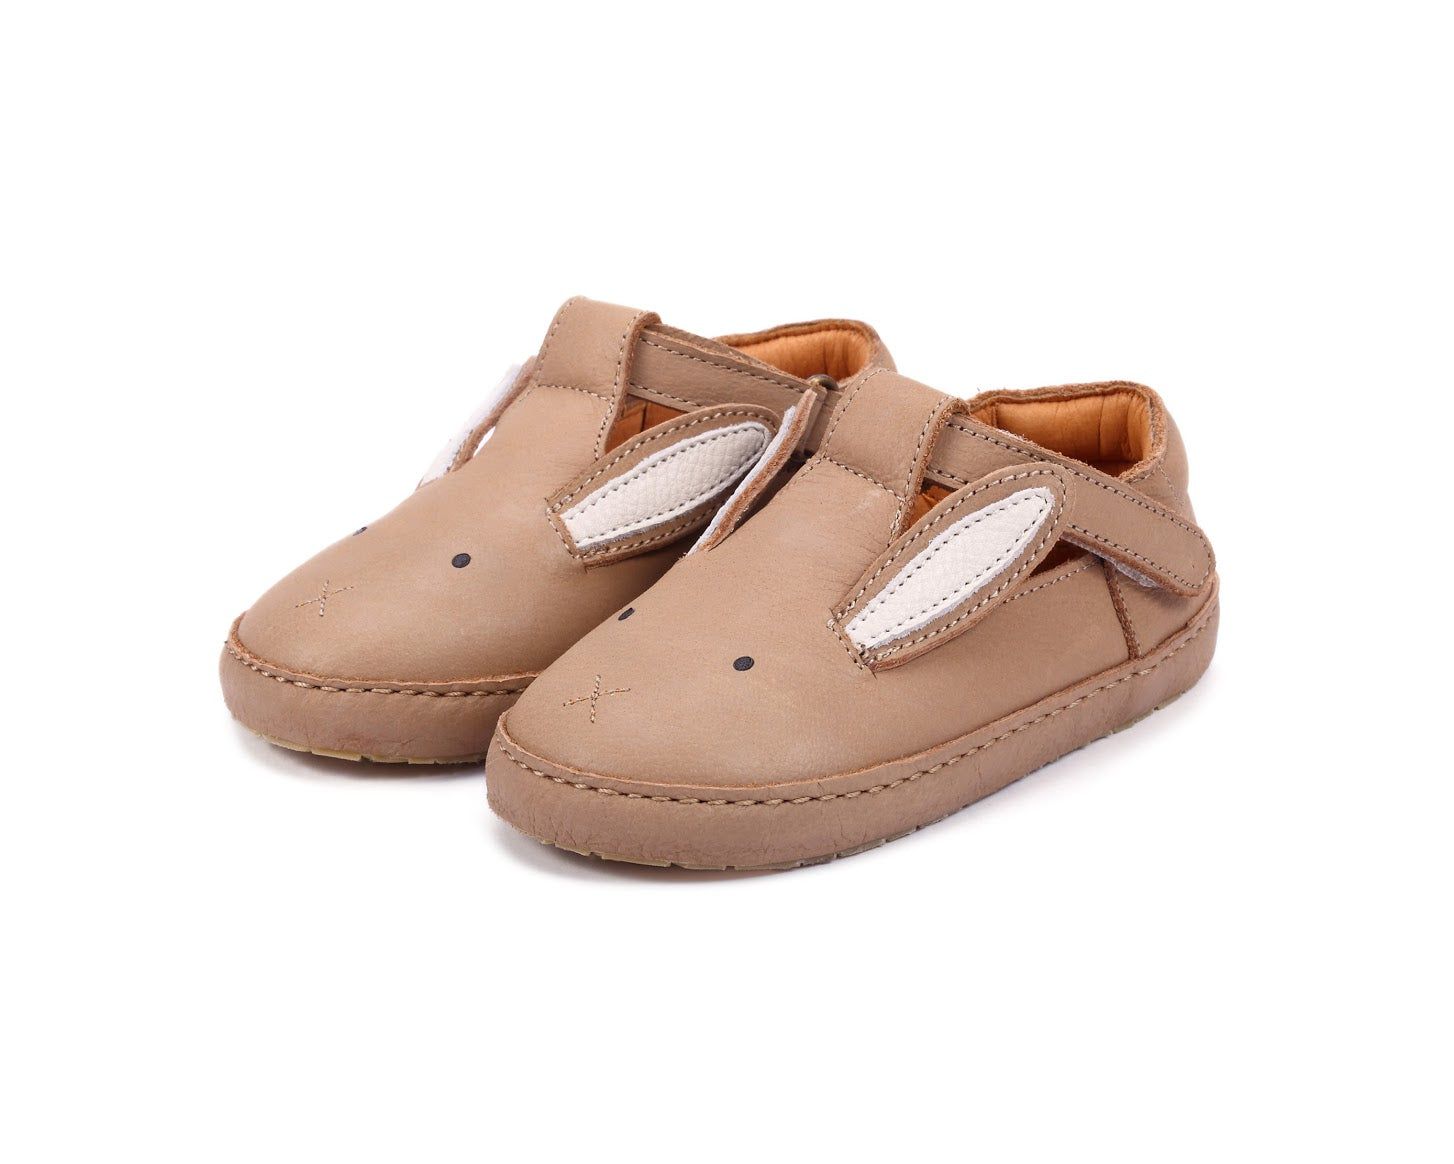 Xan Mary Jane Style Shoes - Little Owly